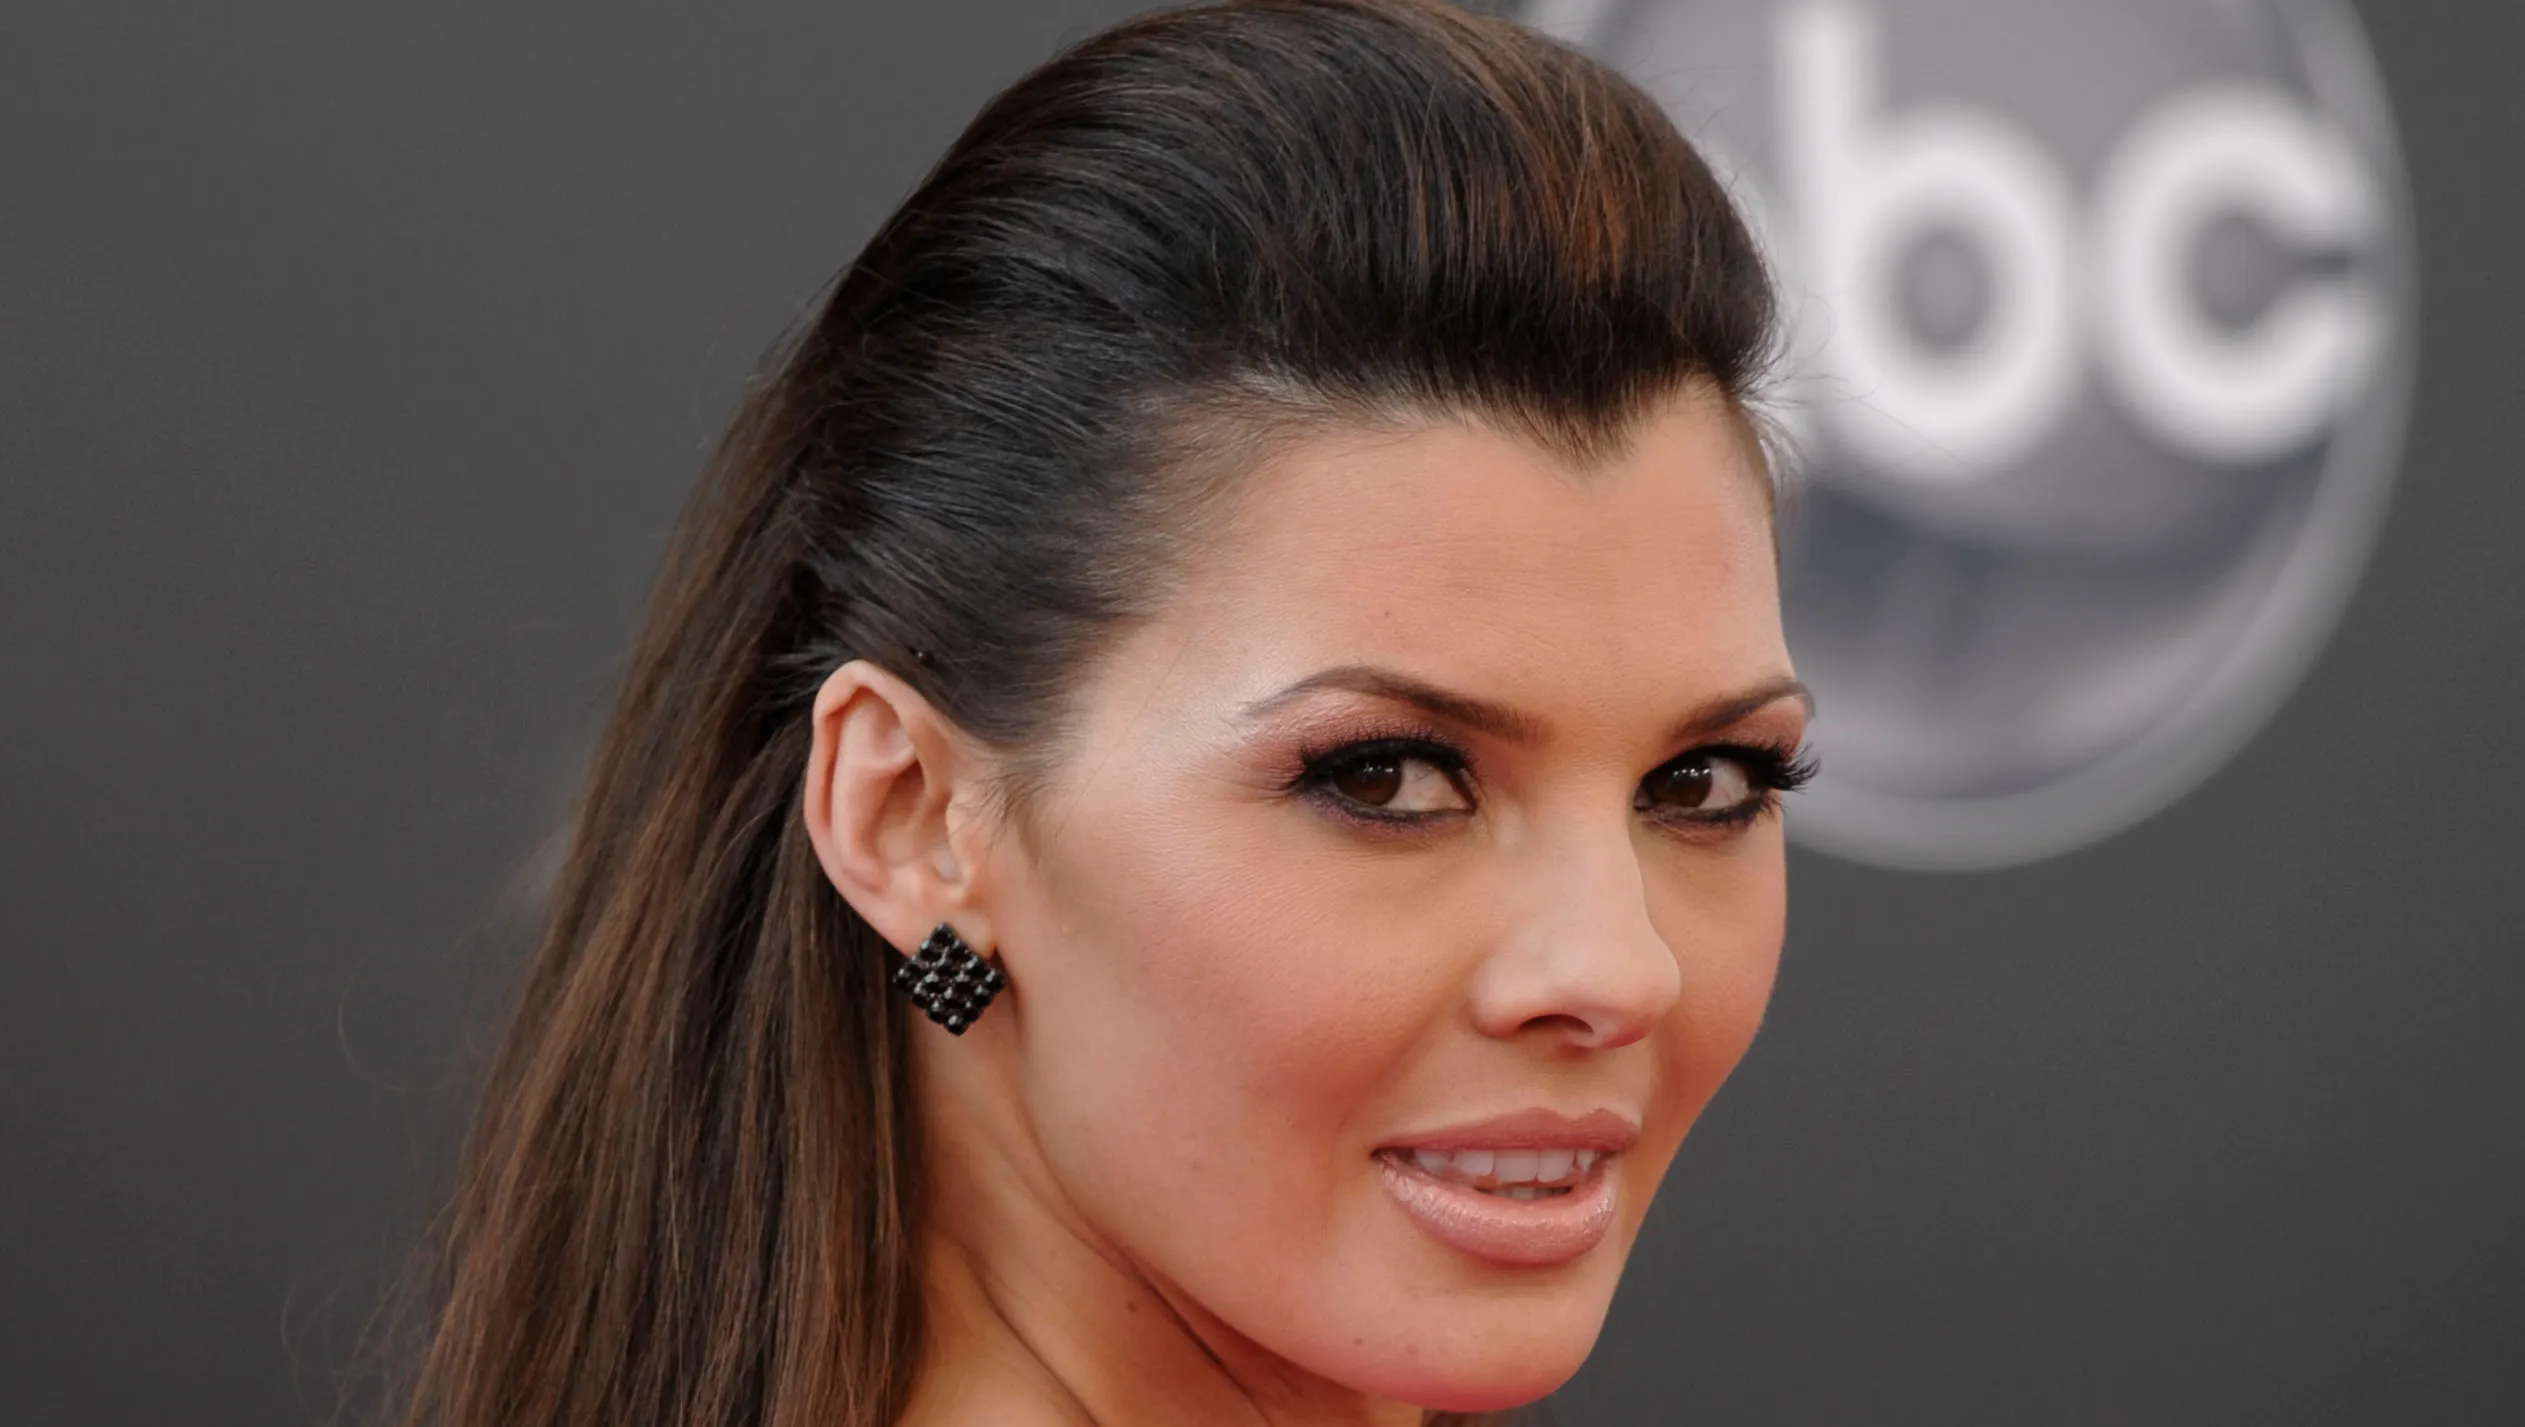 9 Enigmatic Facts About Ali Landry - Facts.net